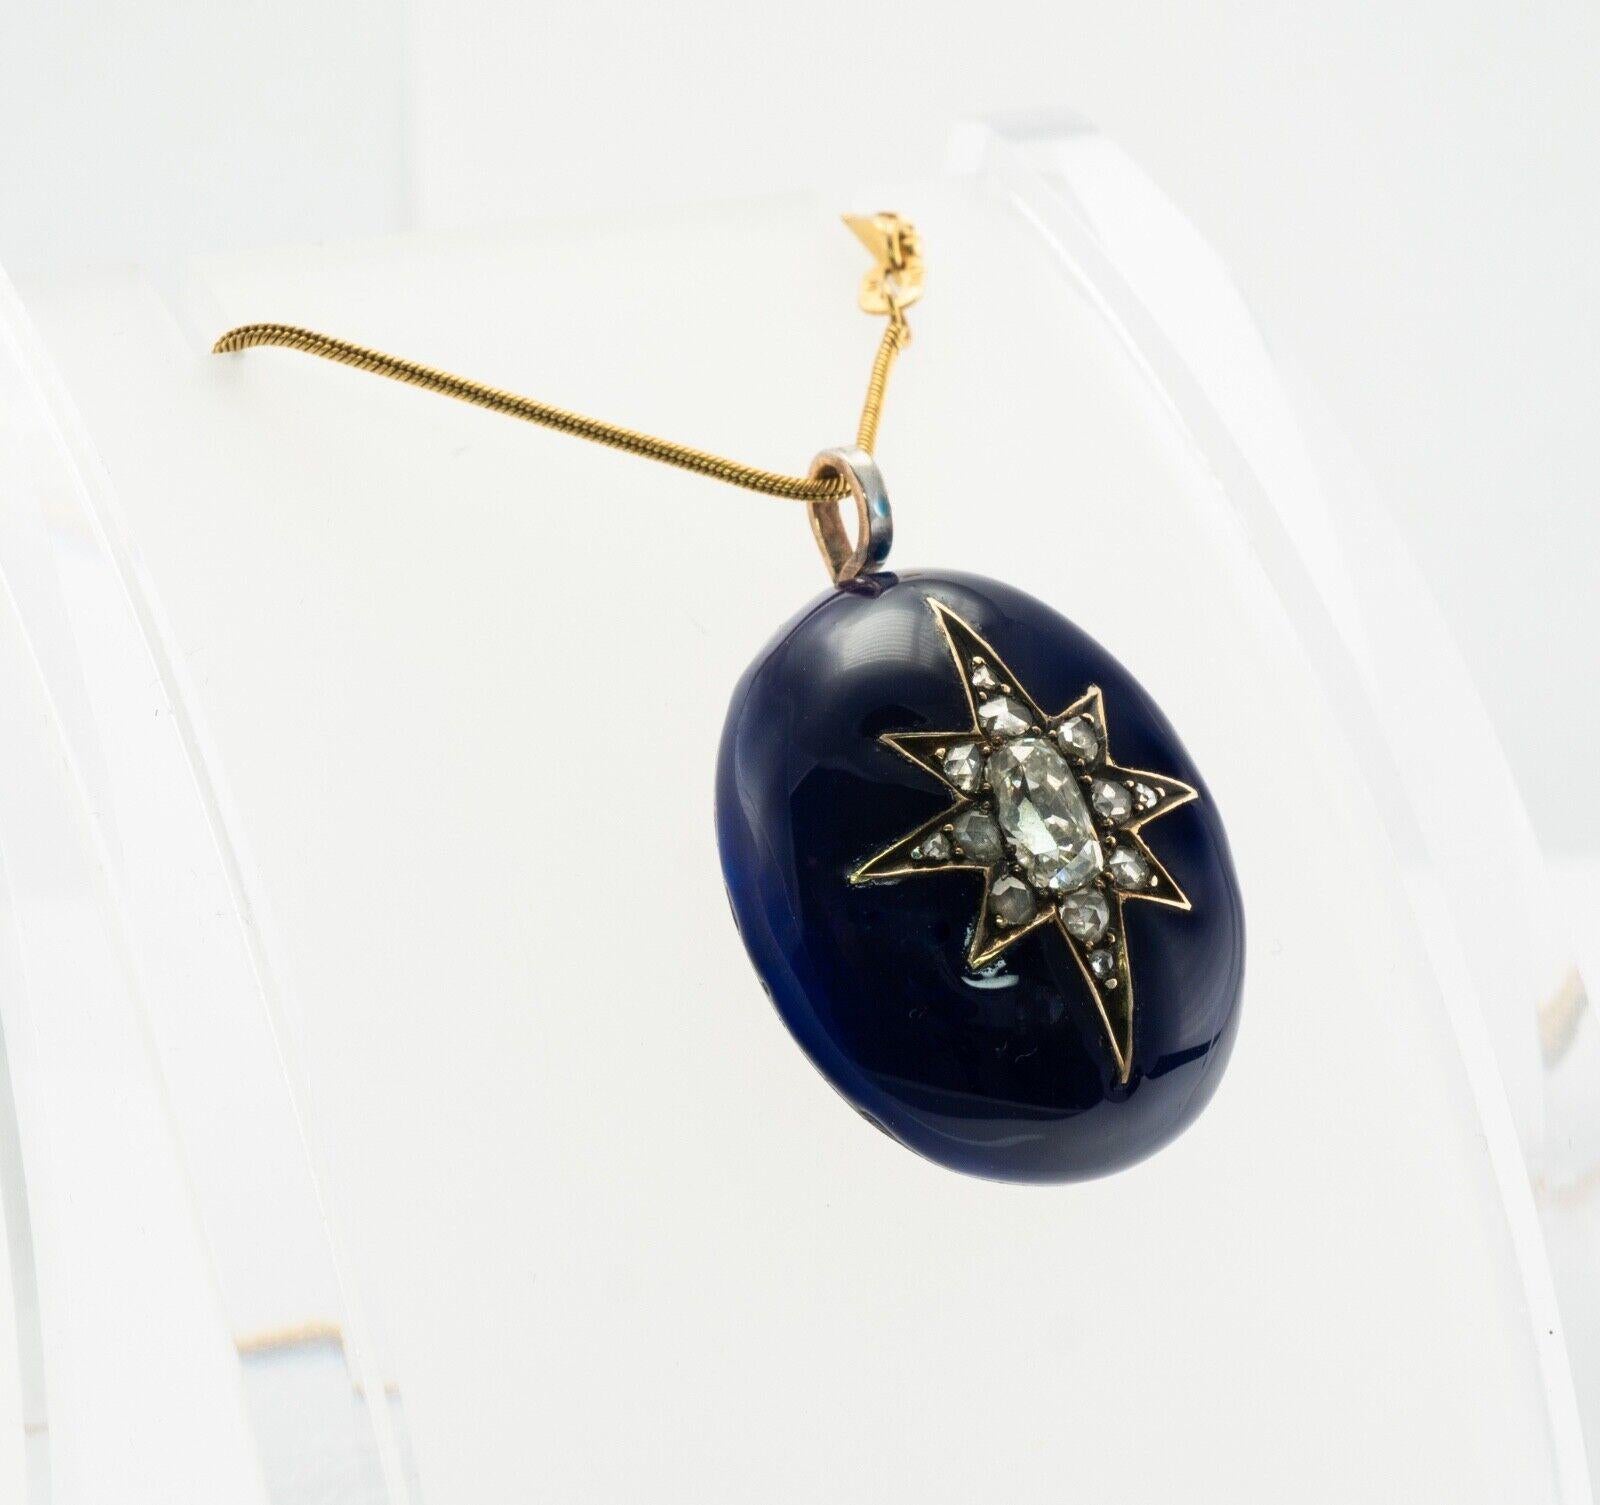 Victorian Diamond Star Blue Enamel Pendant 14K Gold Antique c. 1890

This absolutely gorgeous antique circa 1890s pendant is finely crafted in 14K Yellow Gold (carefully tested and guaranteed). Eight pointed star on the top of royal blue enamel has